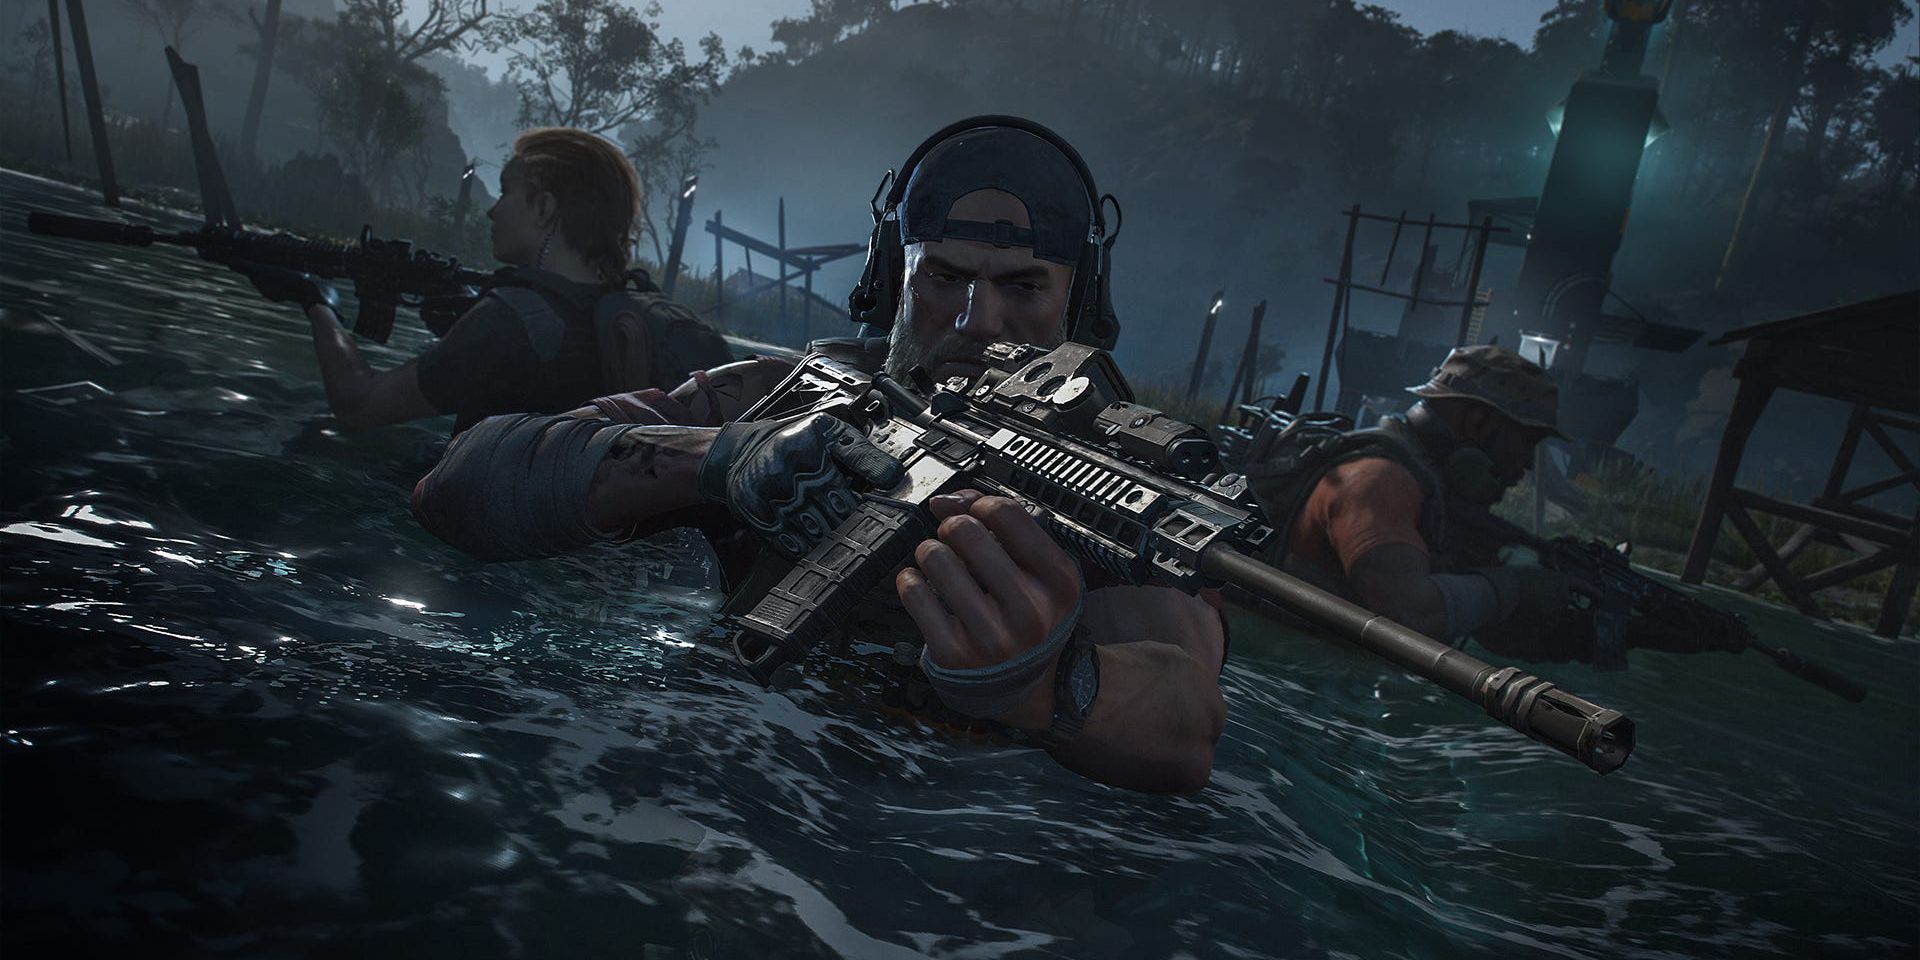 Repressalier Hemmelighed Hjemland When Ghost Recon's Next Game Is Coming